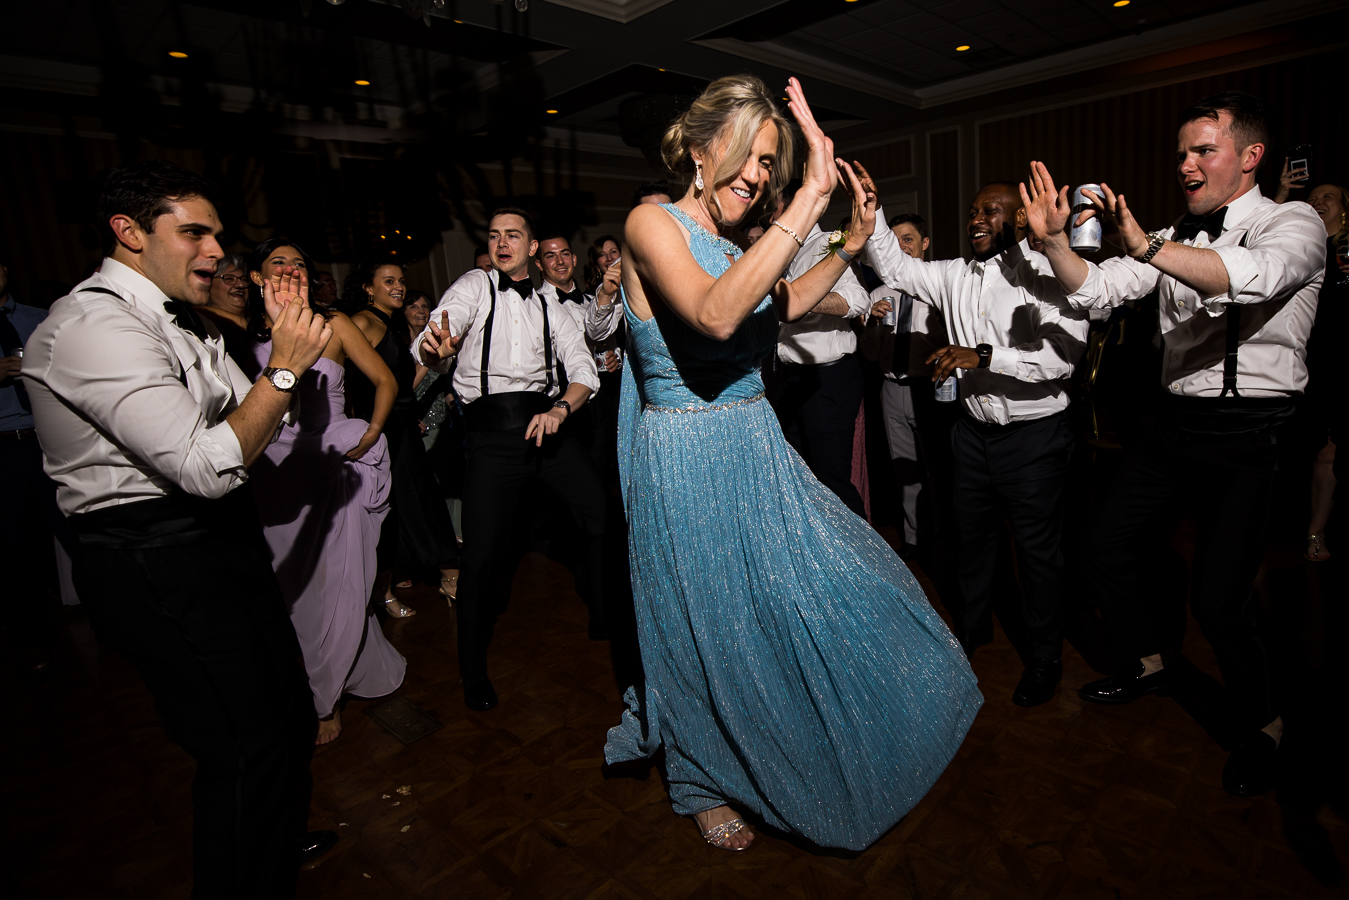 creative, fun image of the brides mom dancing on the dance floor with her hands in the air during the wedding reception